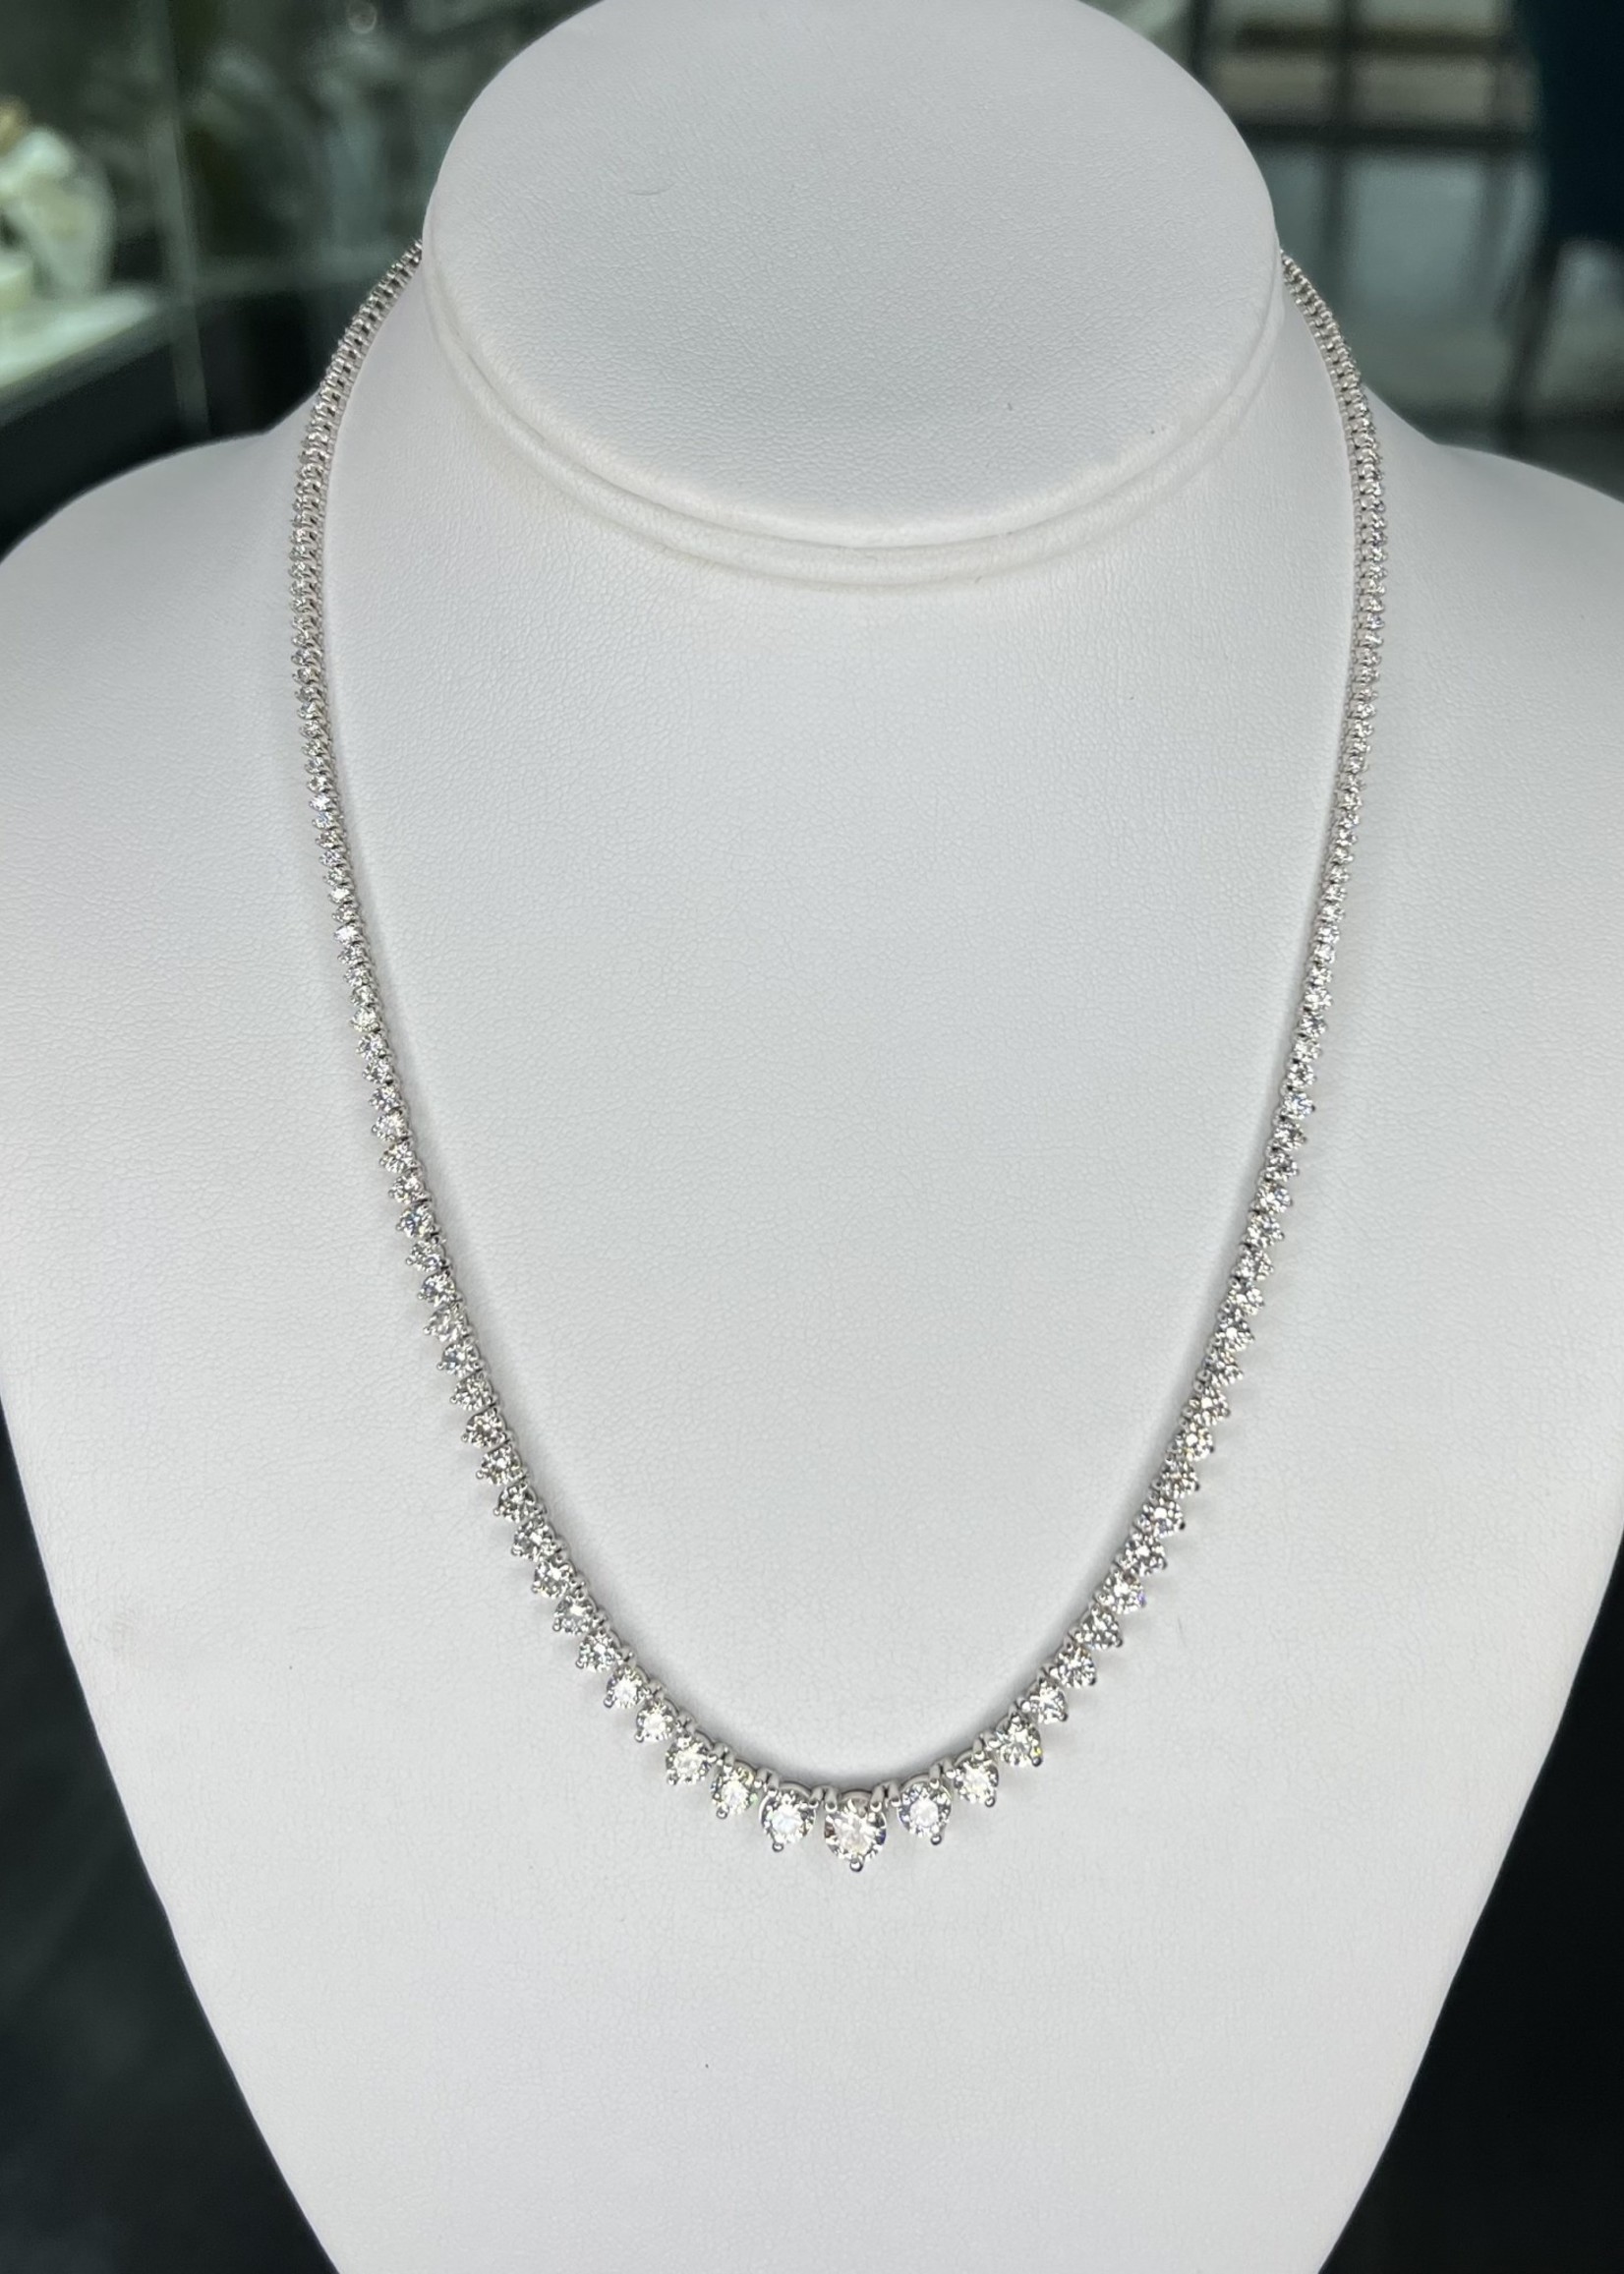 14kW 11.09ctw Natural Diamond Tennis Necklace. A Beloved Classic!